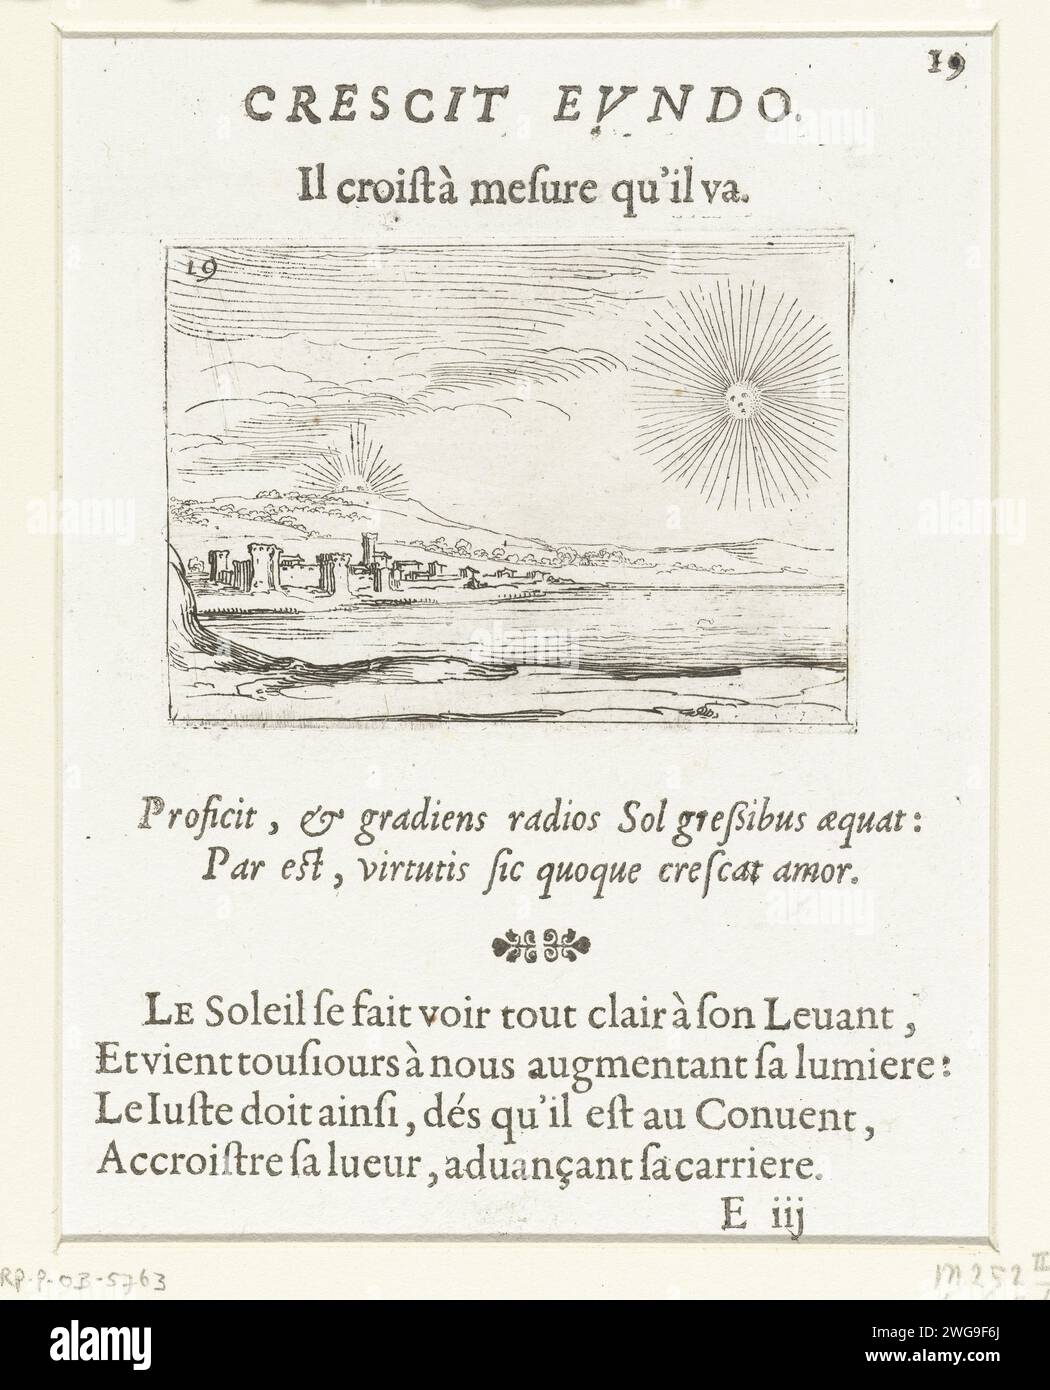 Sunrise, Jacques Callot, 1646 print Presentation of the sun that rises above a coastal landscape. Above and below this print Latin and French texts in book print. This magazine is part of the emblem series 'Monastic Life in Emblemen'. In addition to an illustrated title page and 26 emblems, the second state of this series is a title page and a magazine with assignment, both in book print without image. print maker: Nancypublisher: Paris paper etching / letterpress printing sunrise Stock Photo